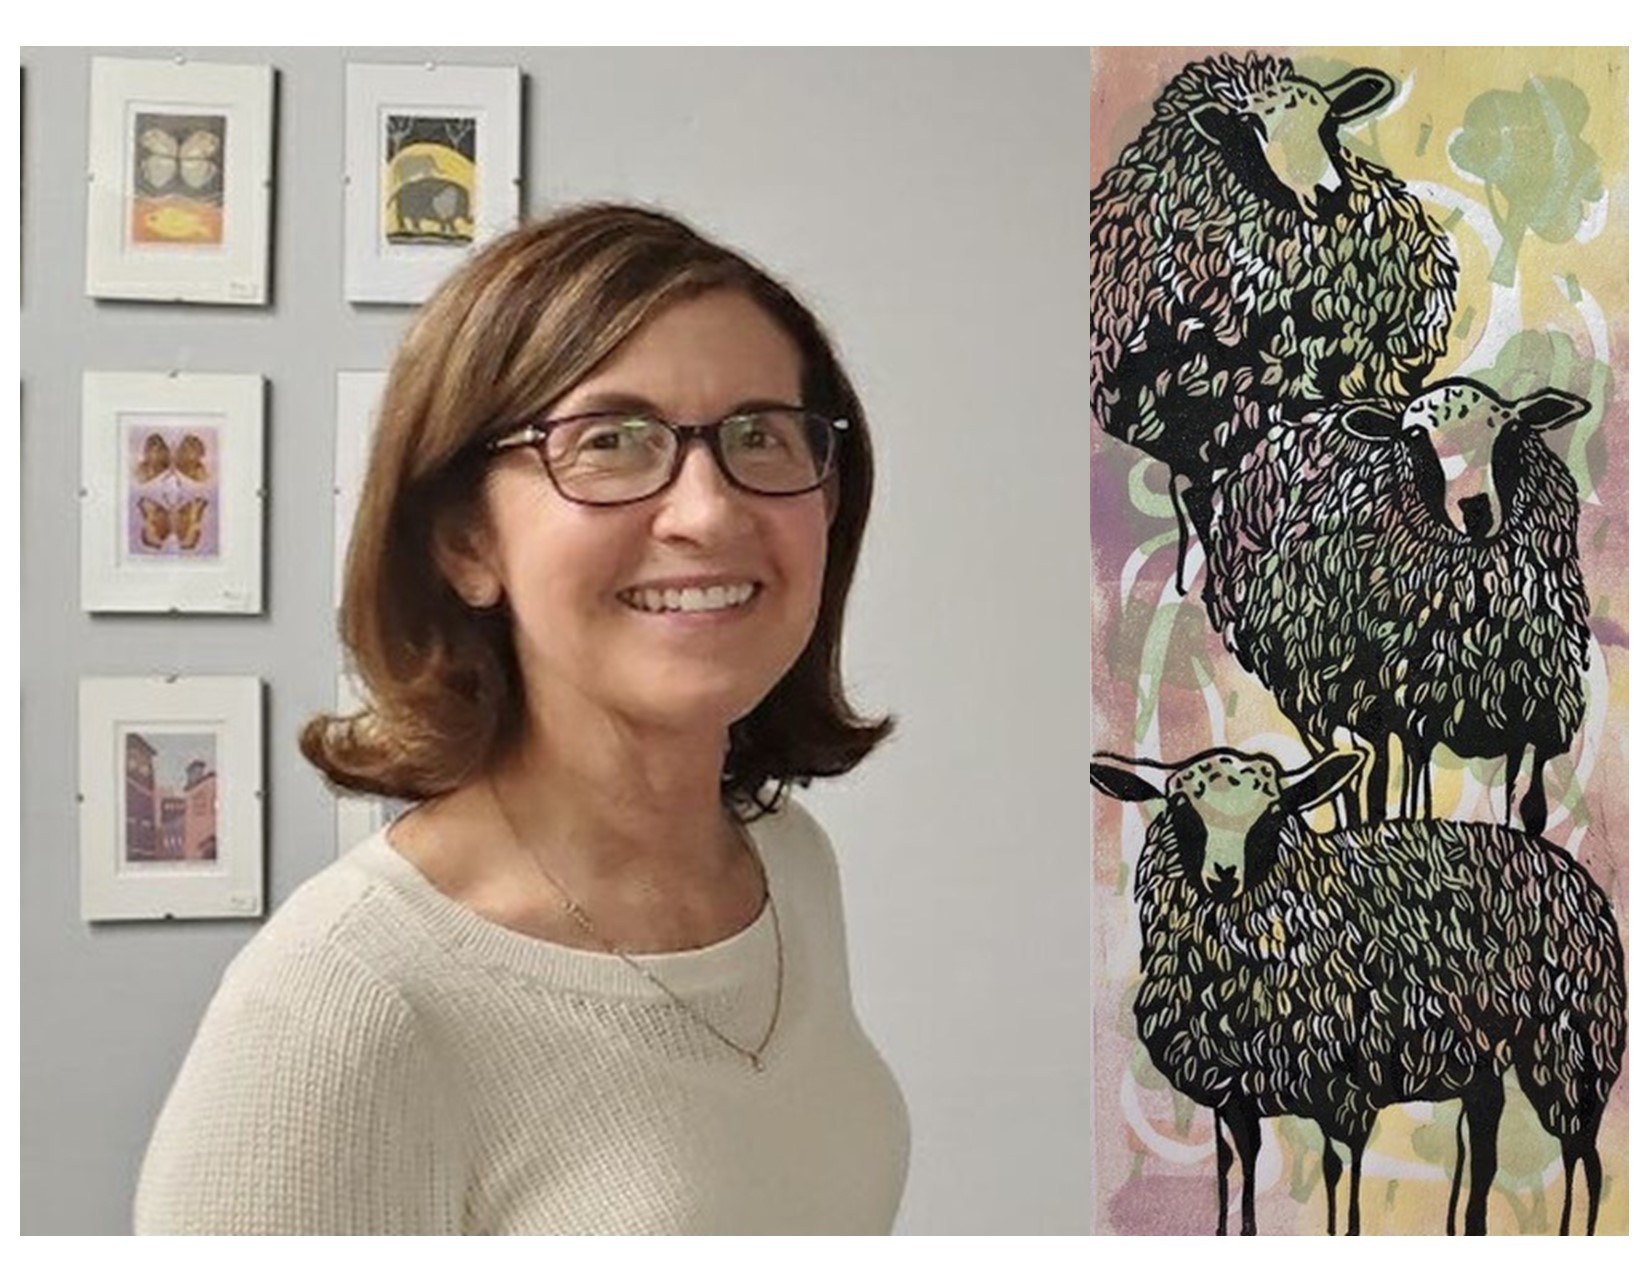 The artist Anne May and one of her art prints of sheep